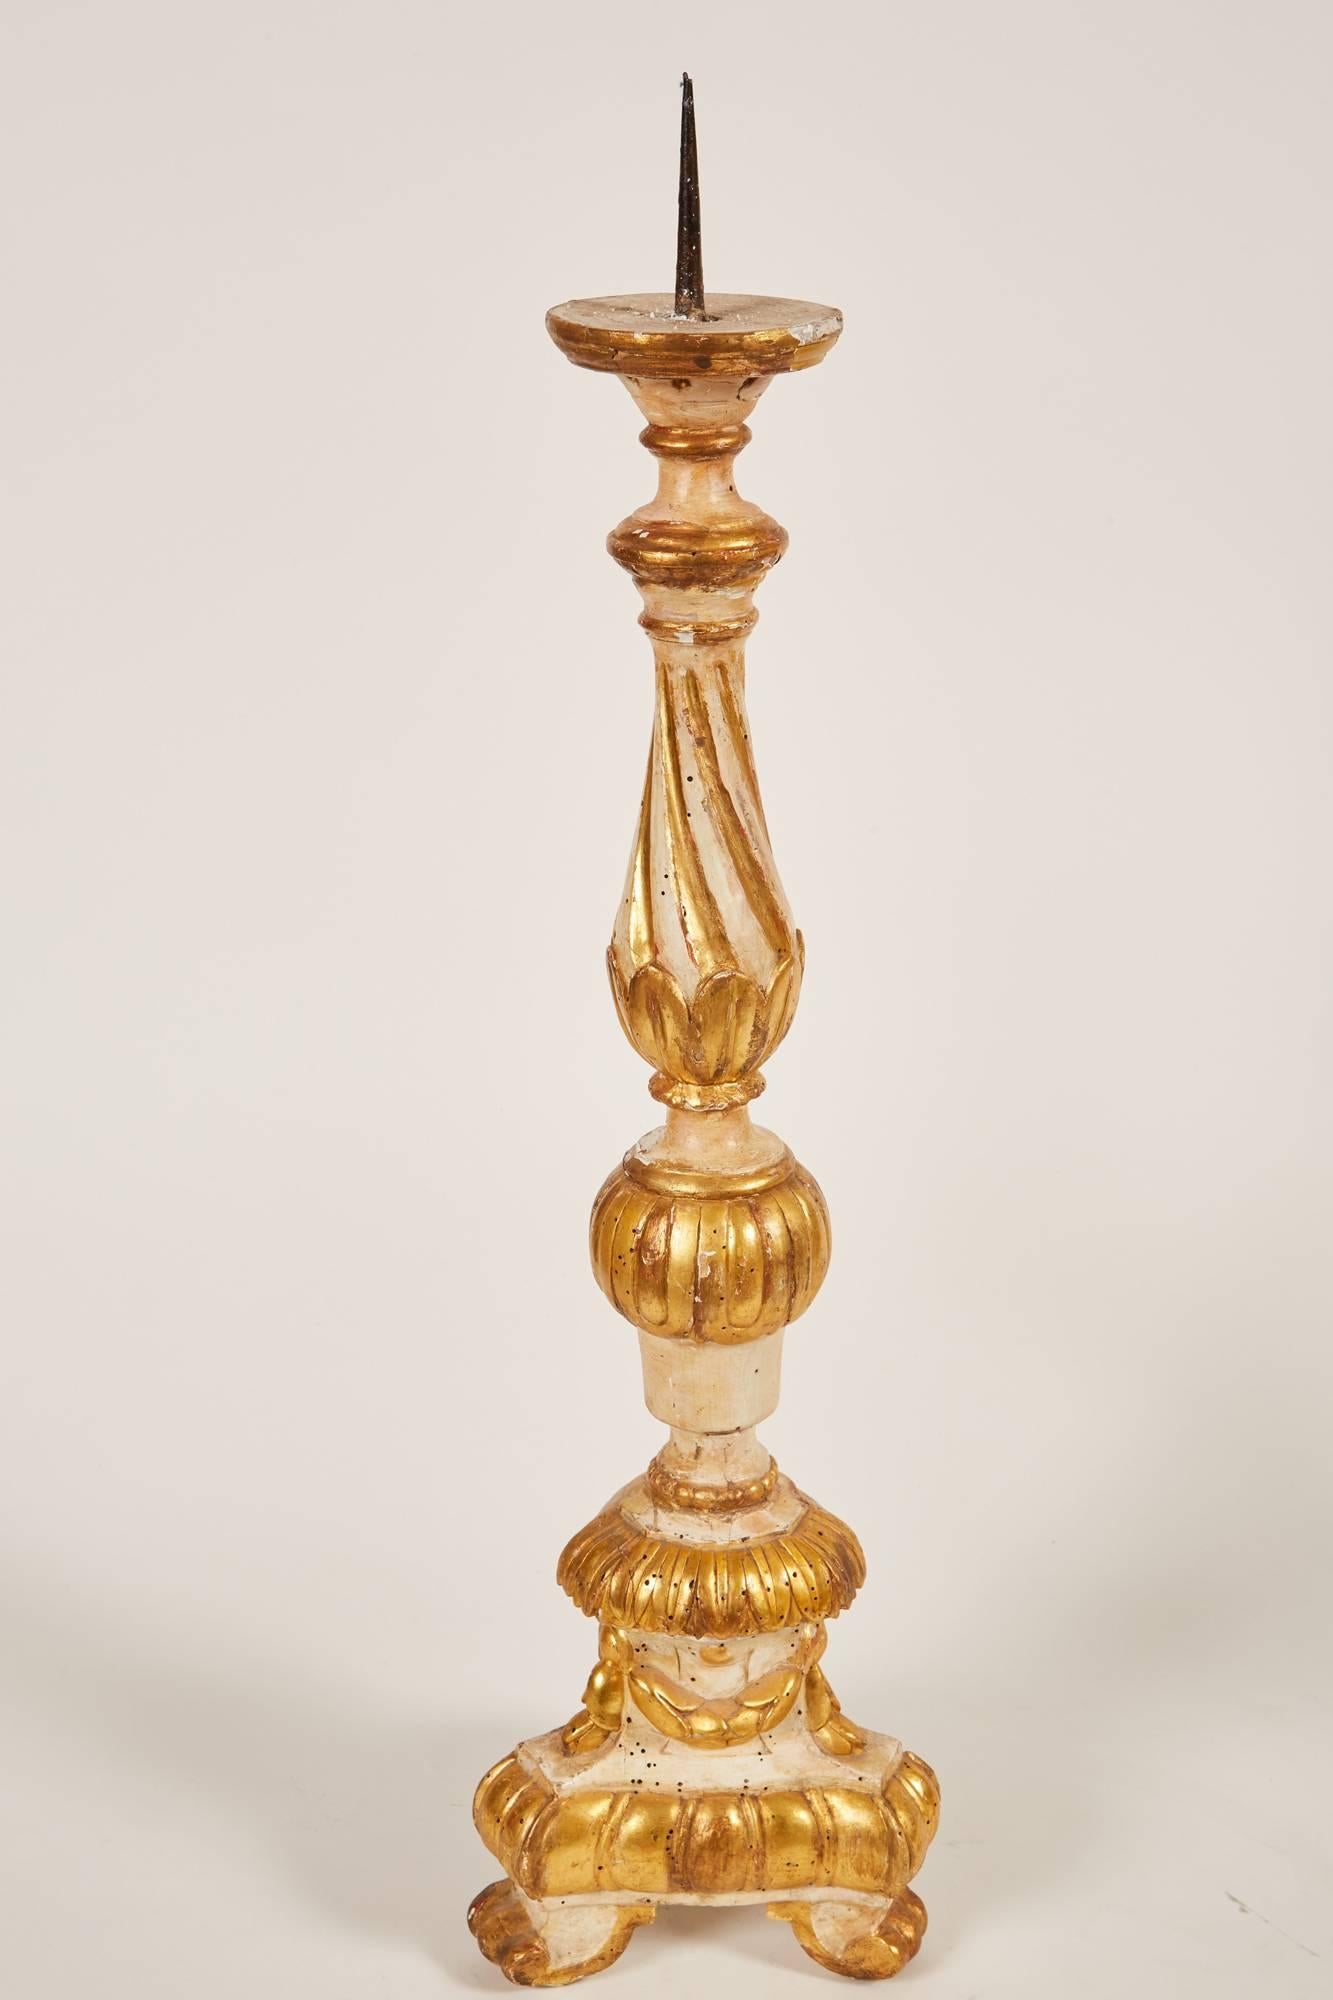 A marvelous pair of carved giltwood Italian candlesticks that feature garlands along the base right above The claw feet, as well as the acanthus leaf motif throughout the entire shaft of the candlestick.